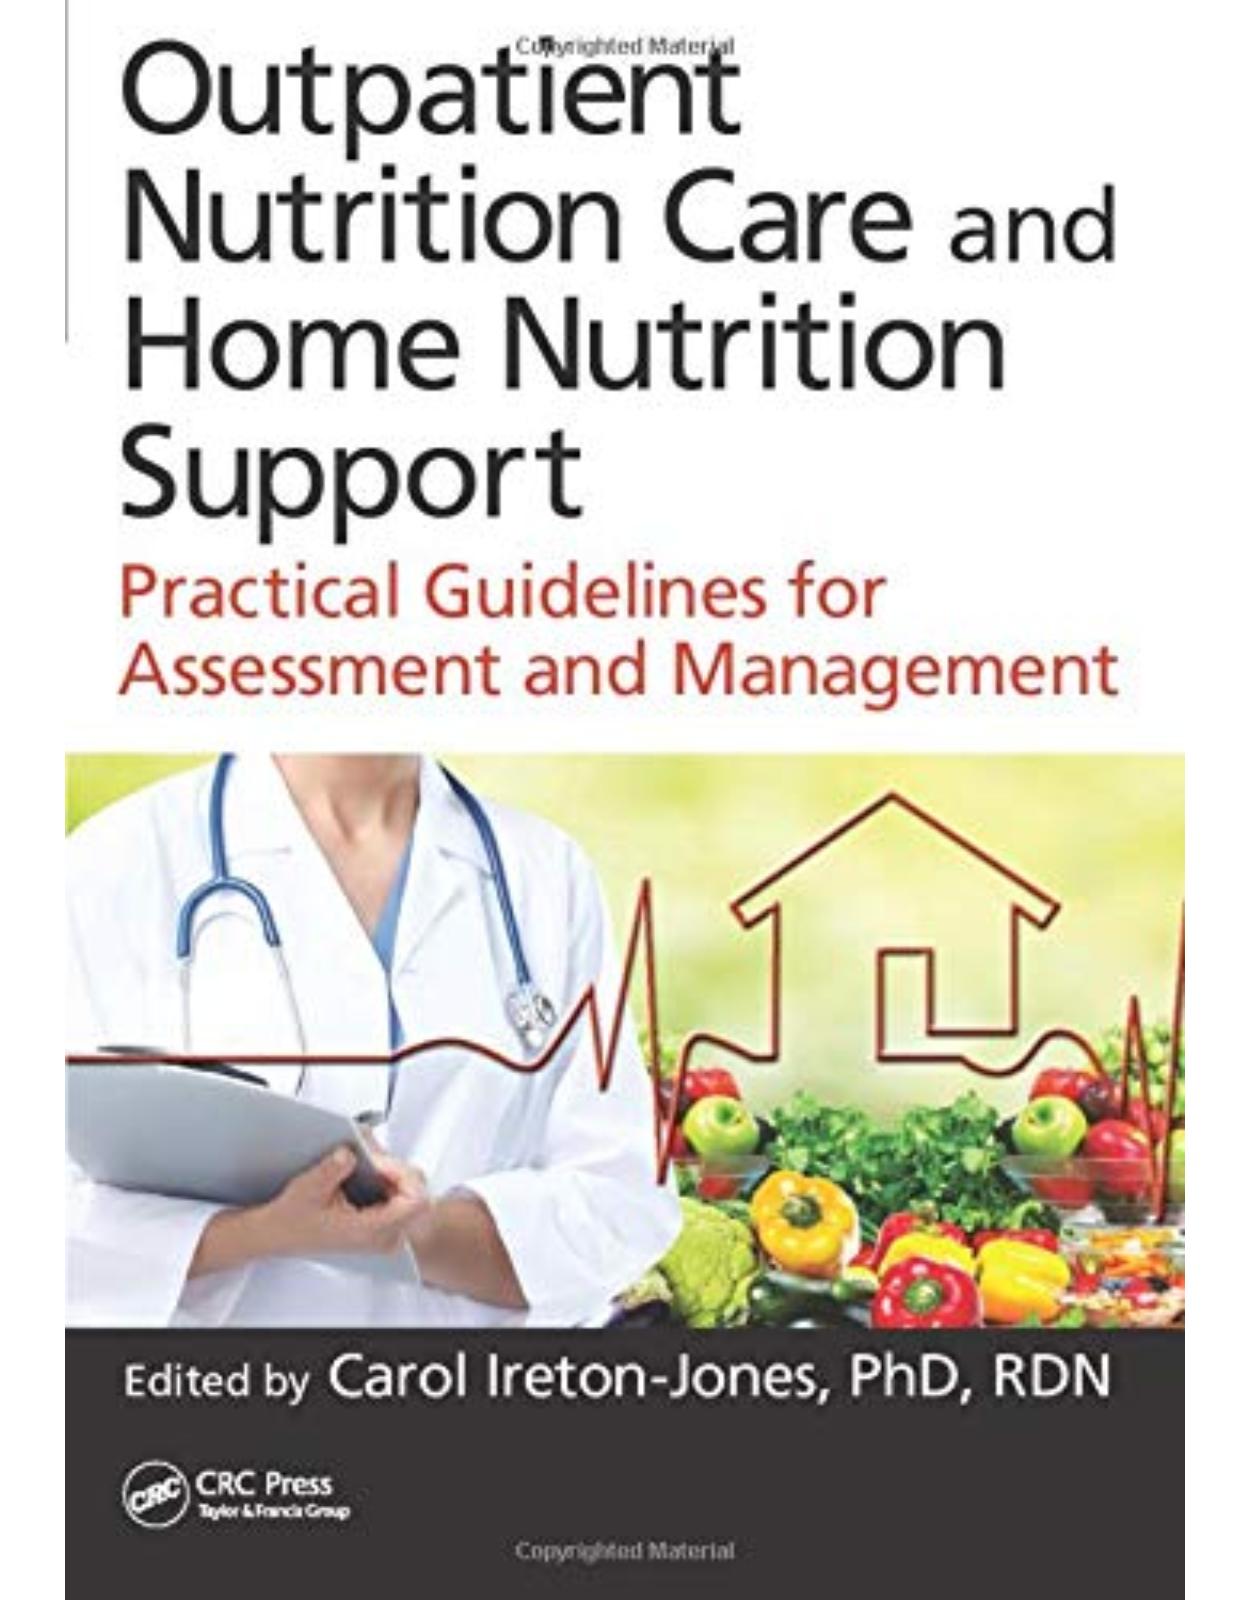 Outpatient Nutrition Care and Home Nutrition Support: Practical Guidelines for Assessment and Management